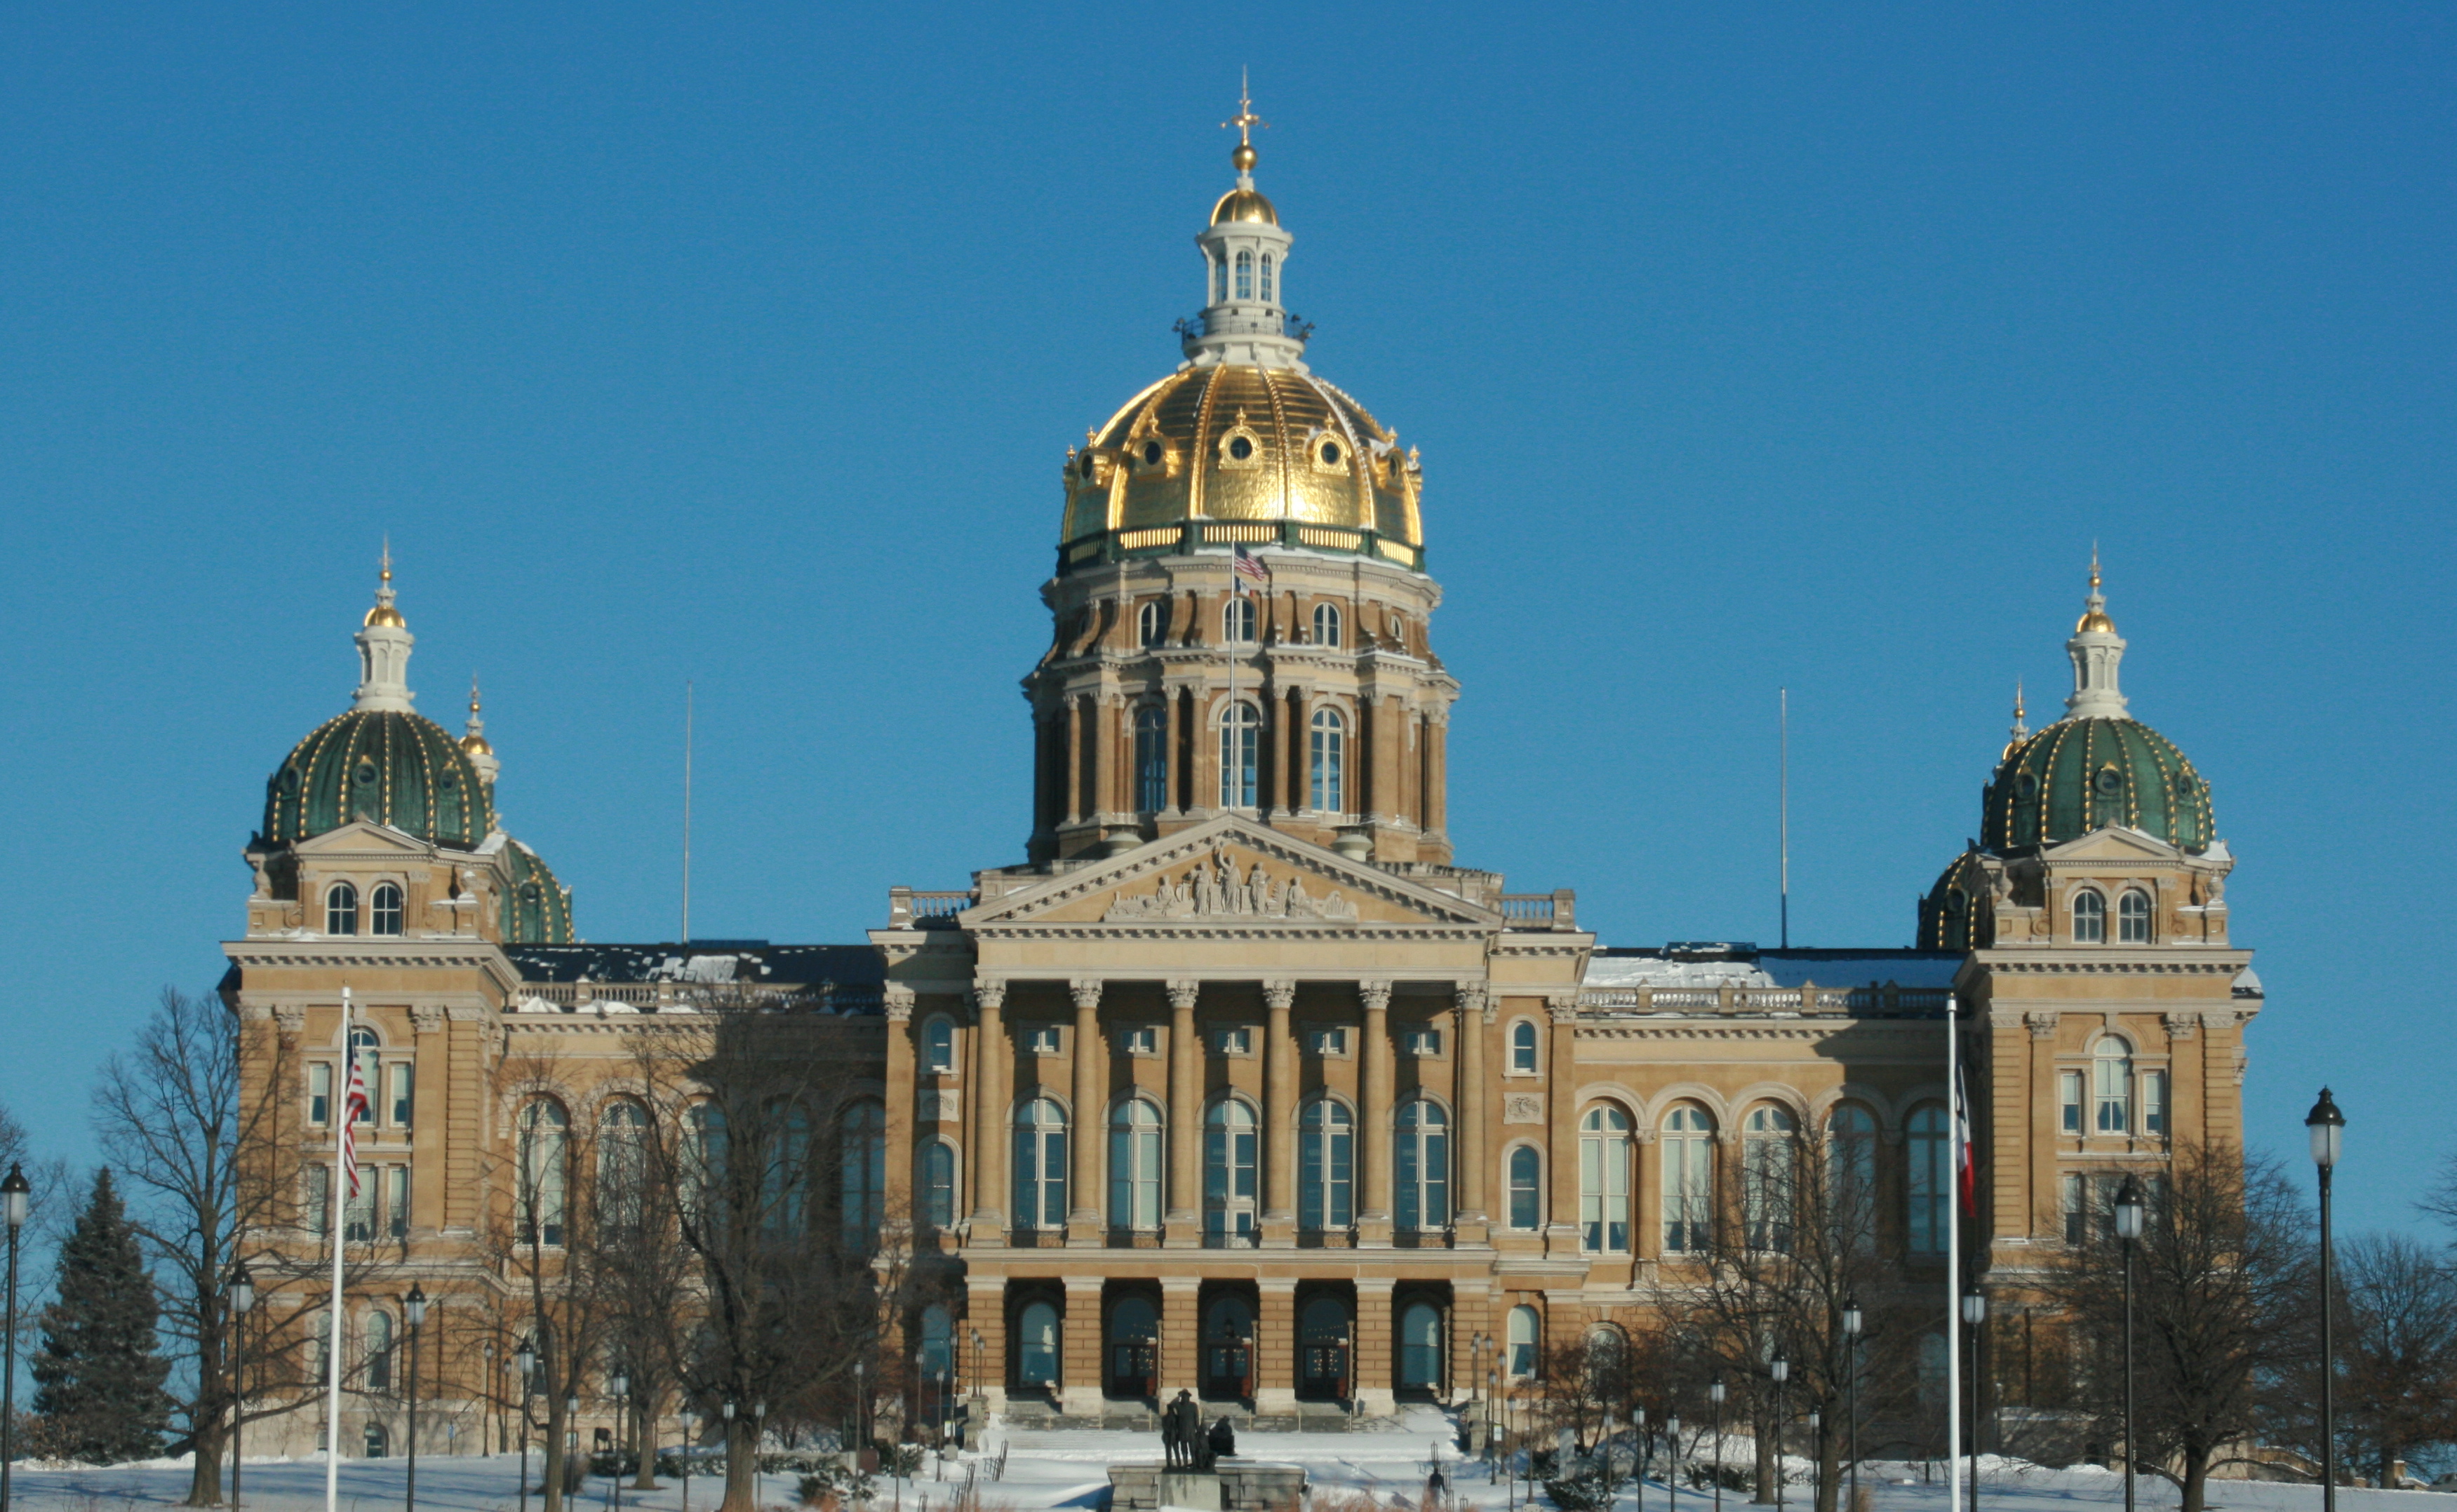 HQ Iowa State Capitol Wallpapers | File 2516.06Kb